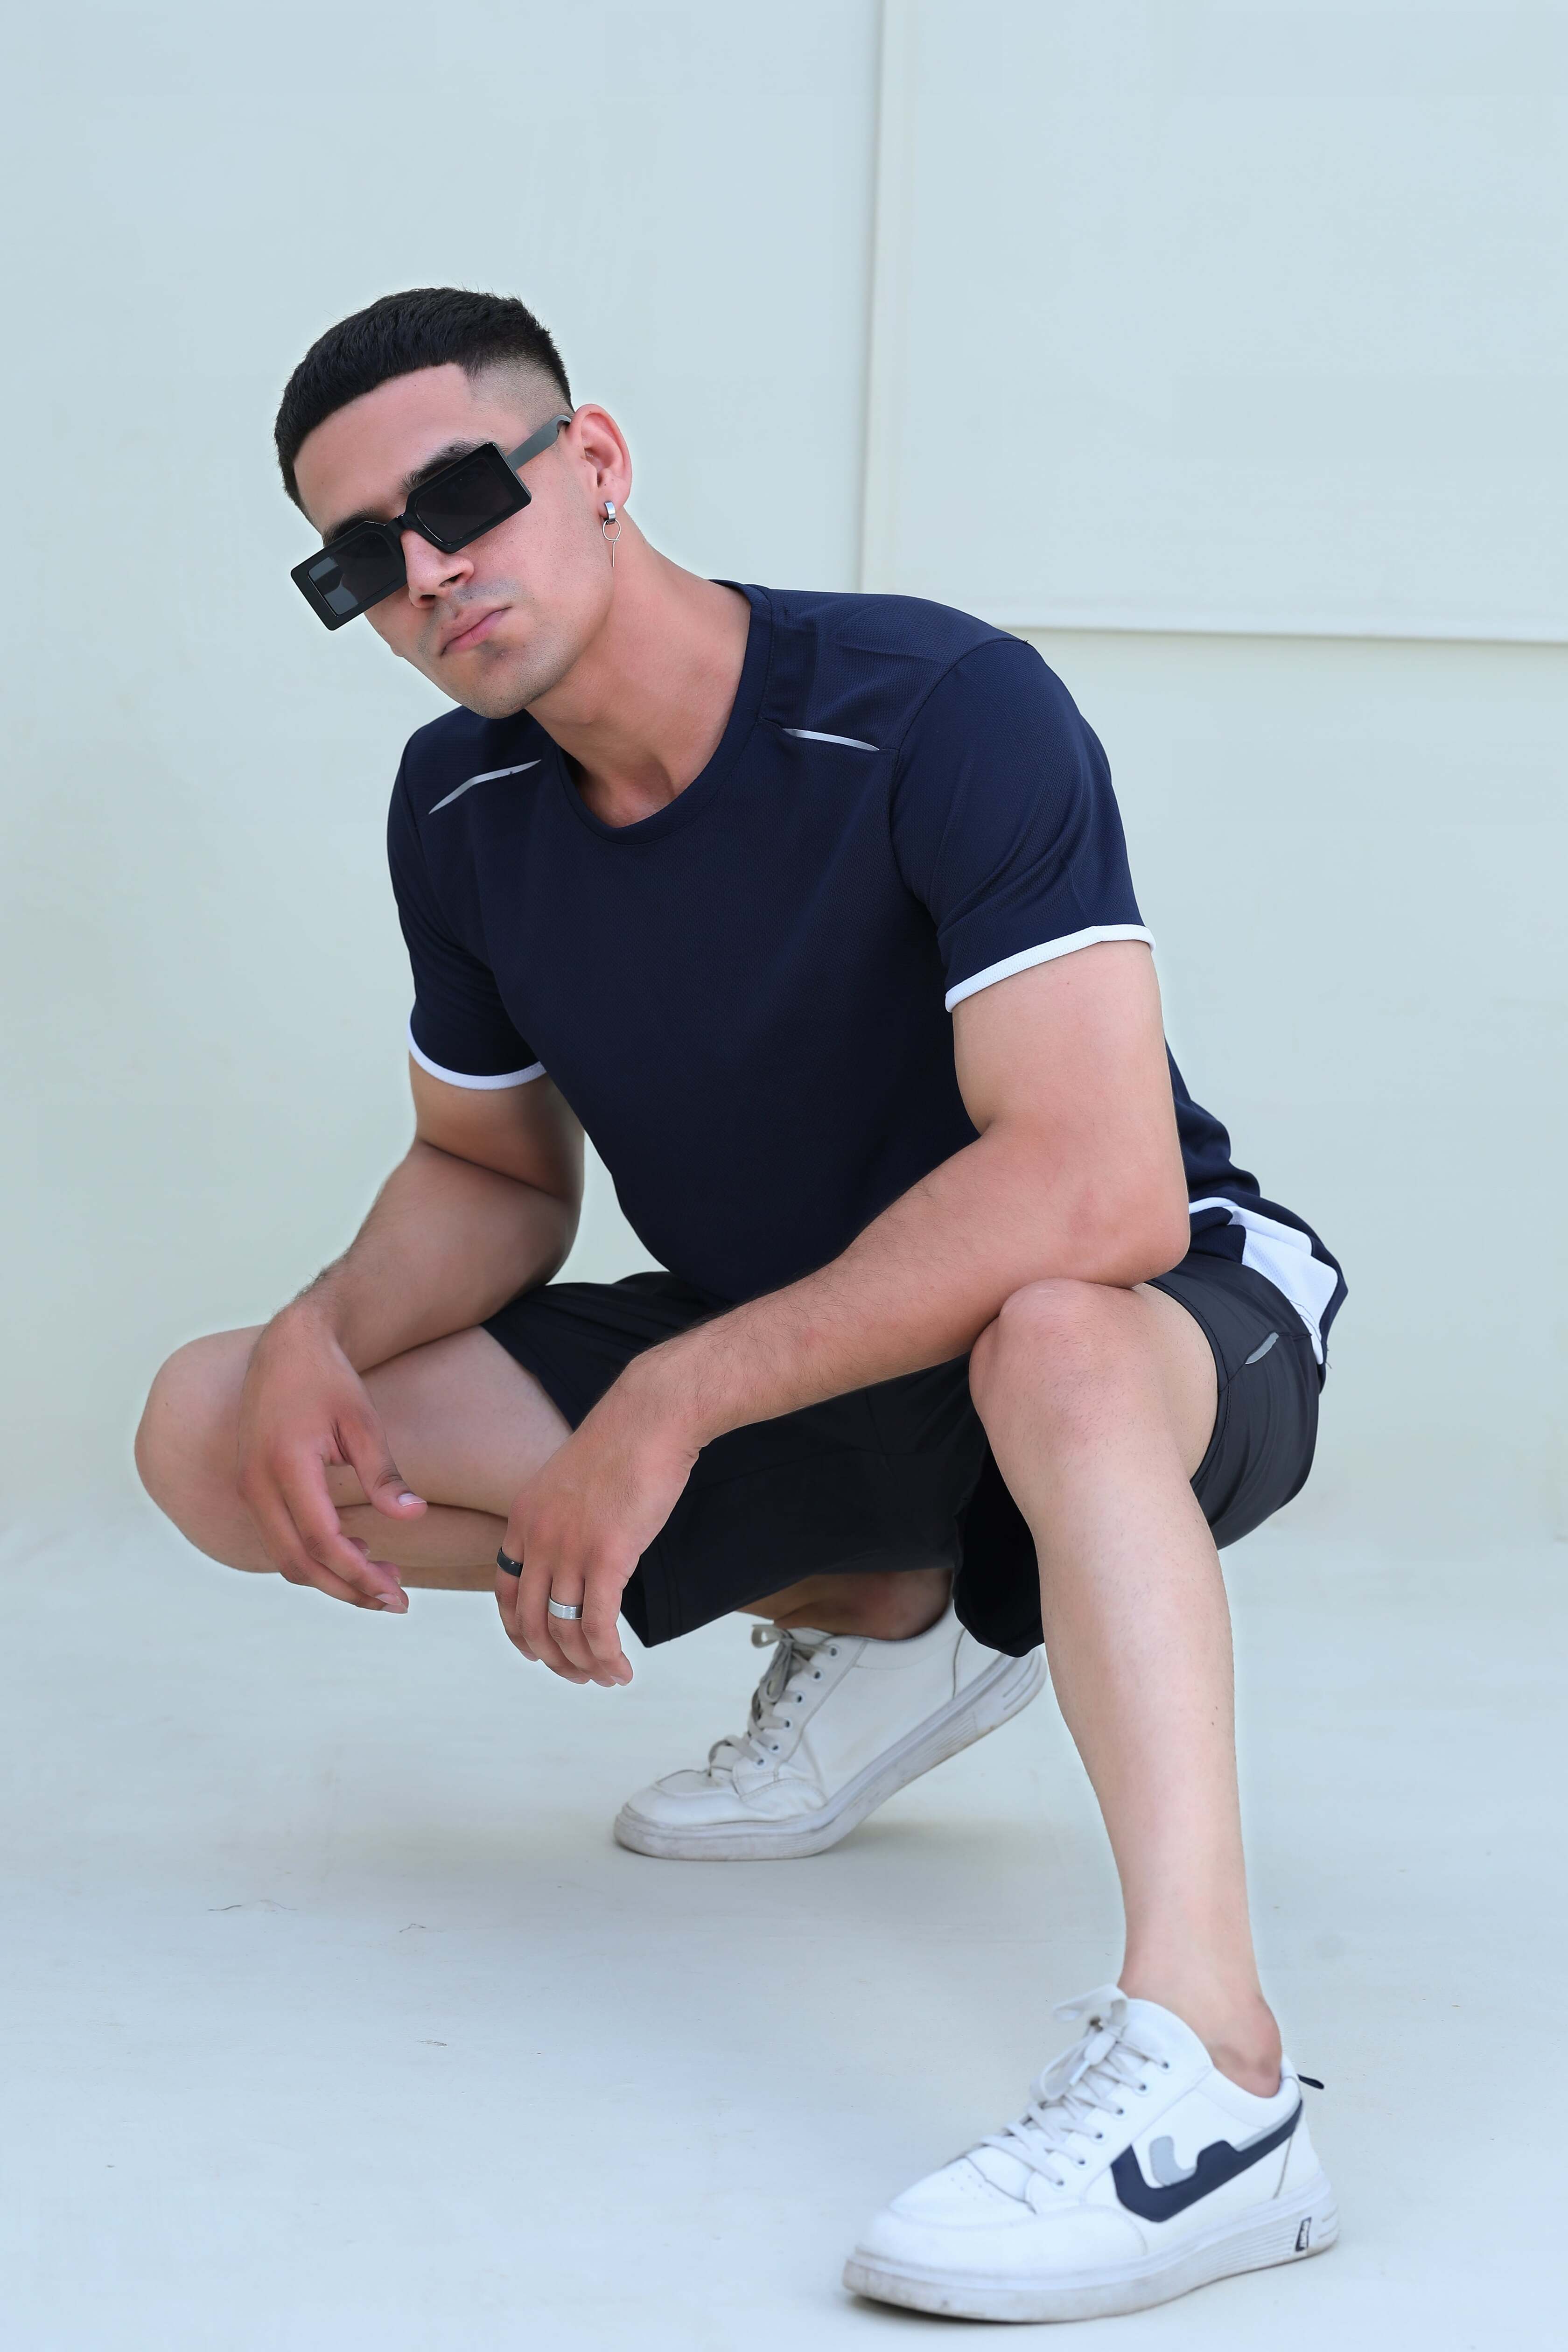 Banner Round Neck Dry-fit Tees for Men-MTST-0066-Navy White